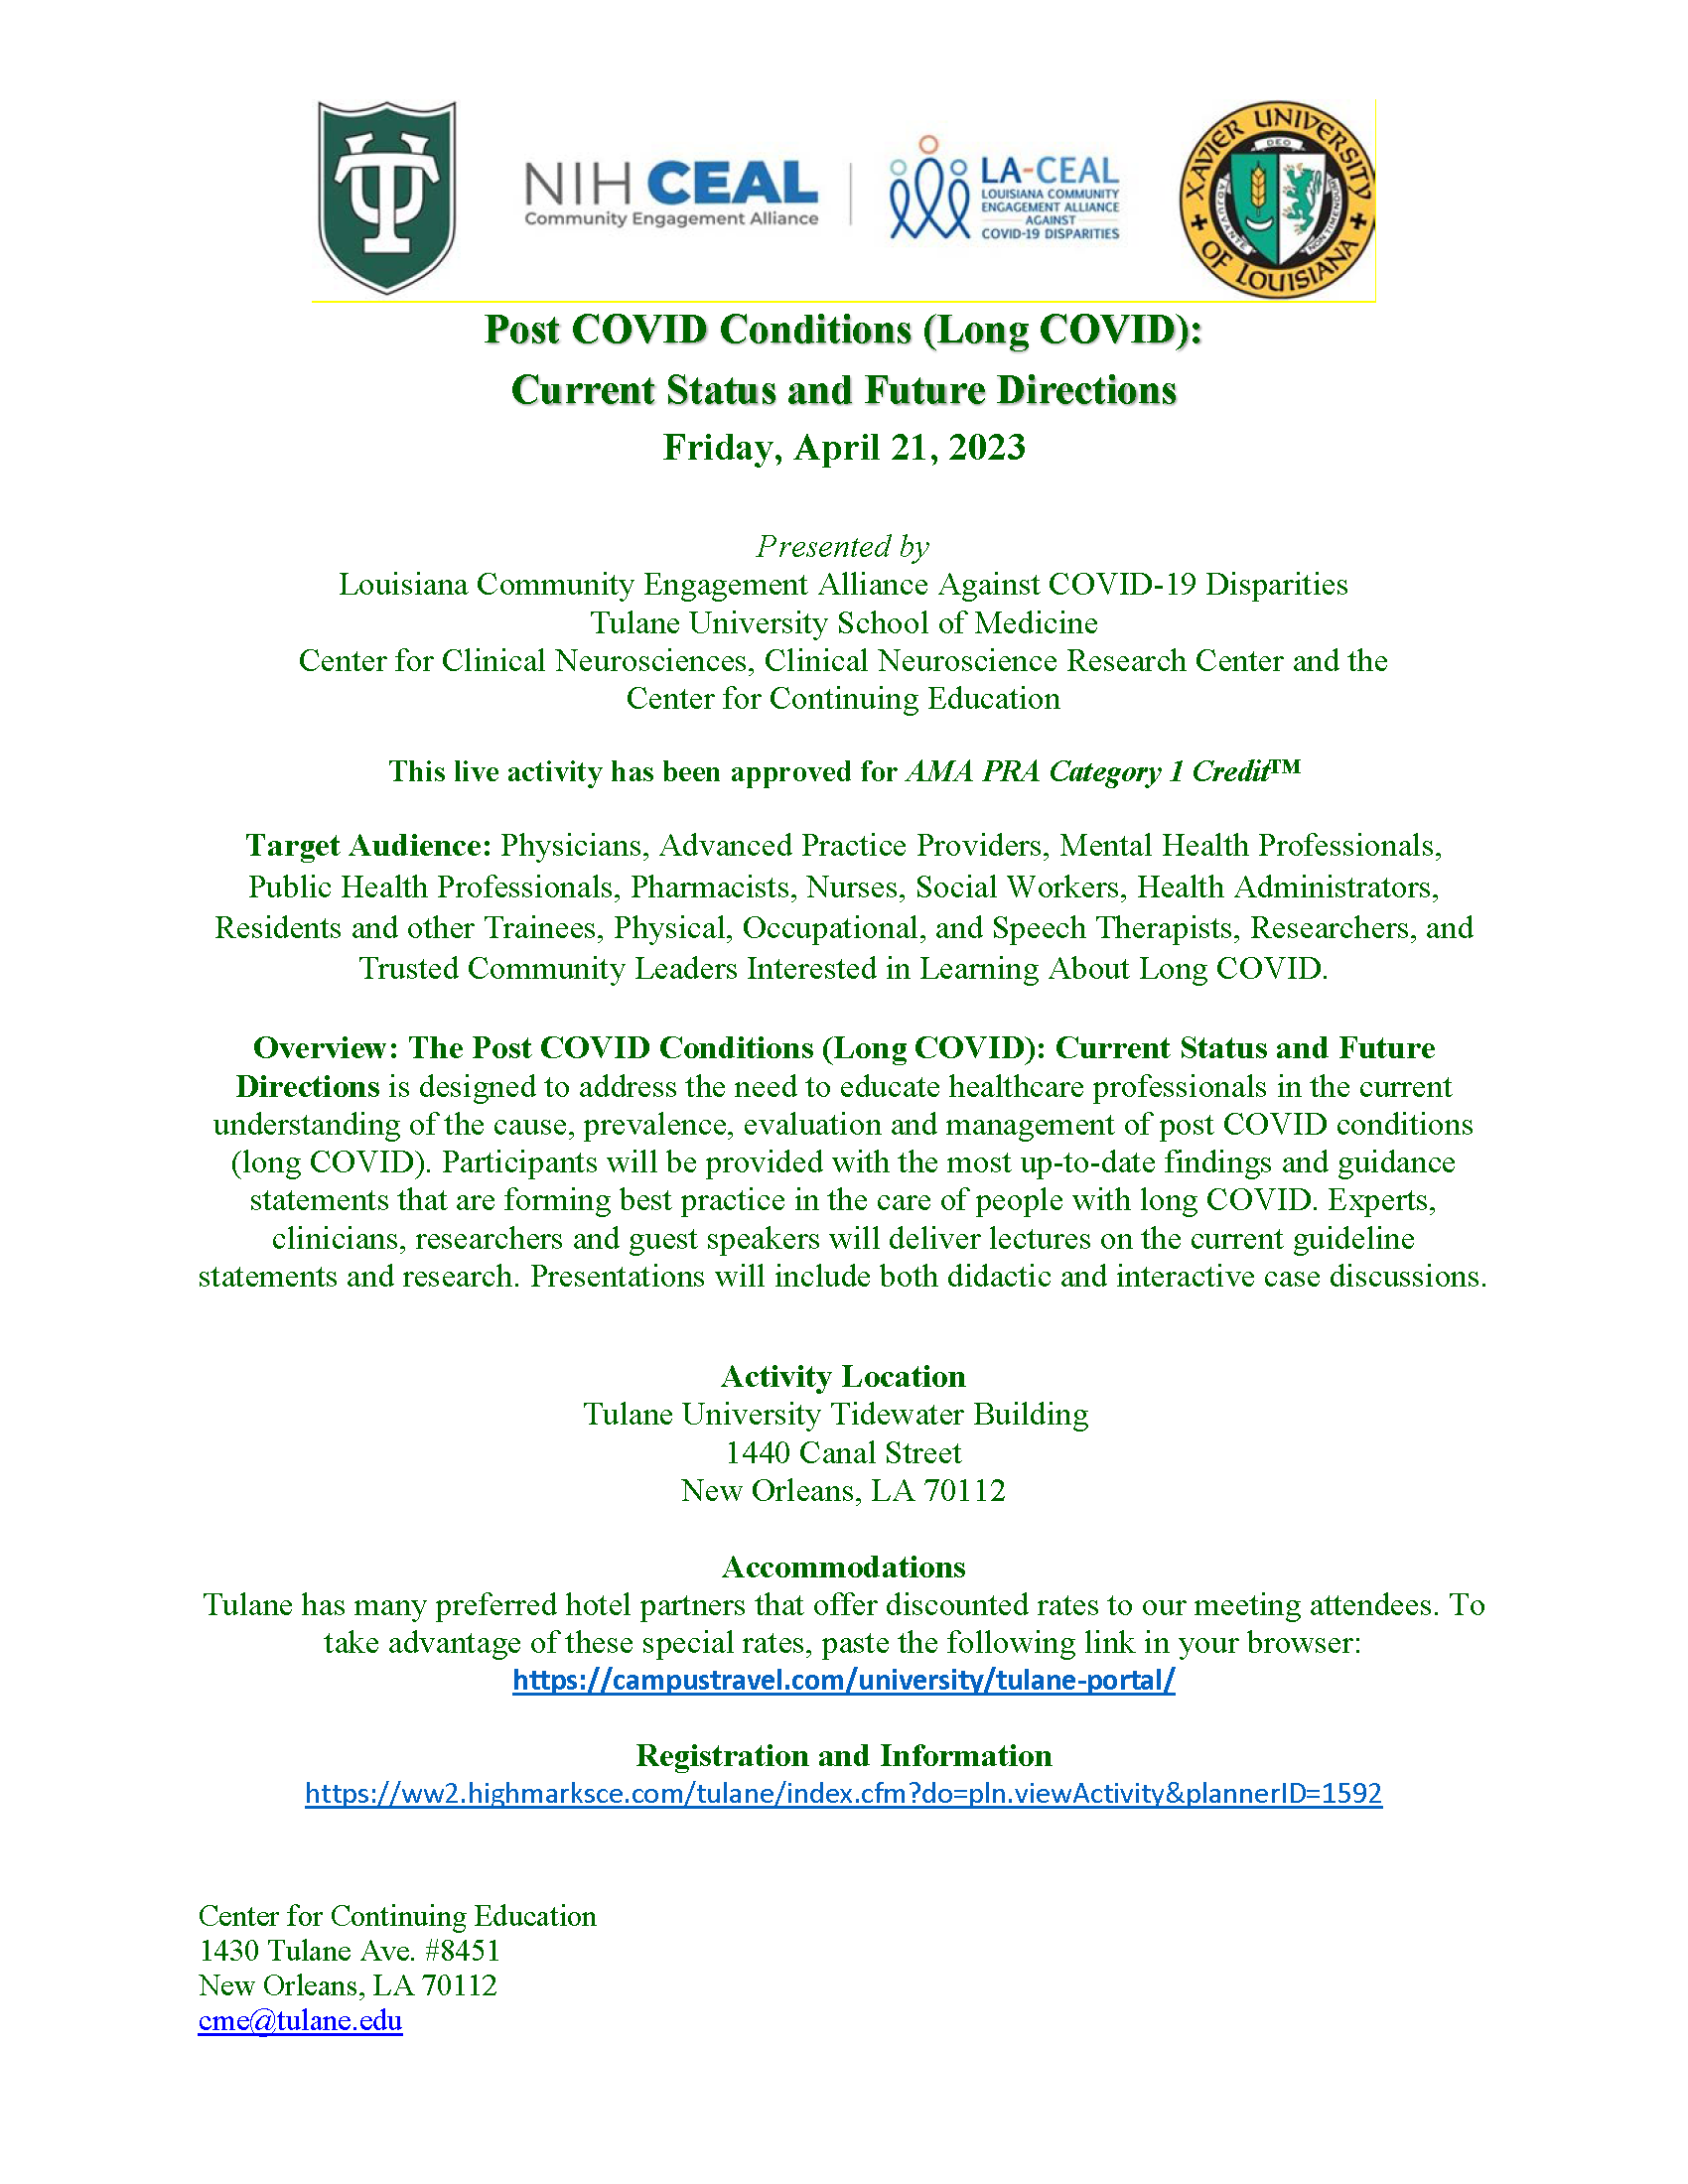 Southeast Post COVID Conditions Symposium